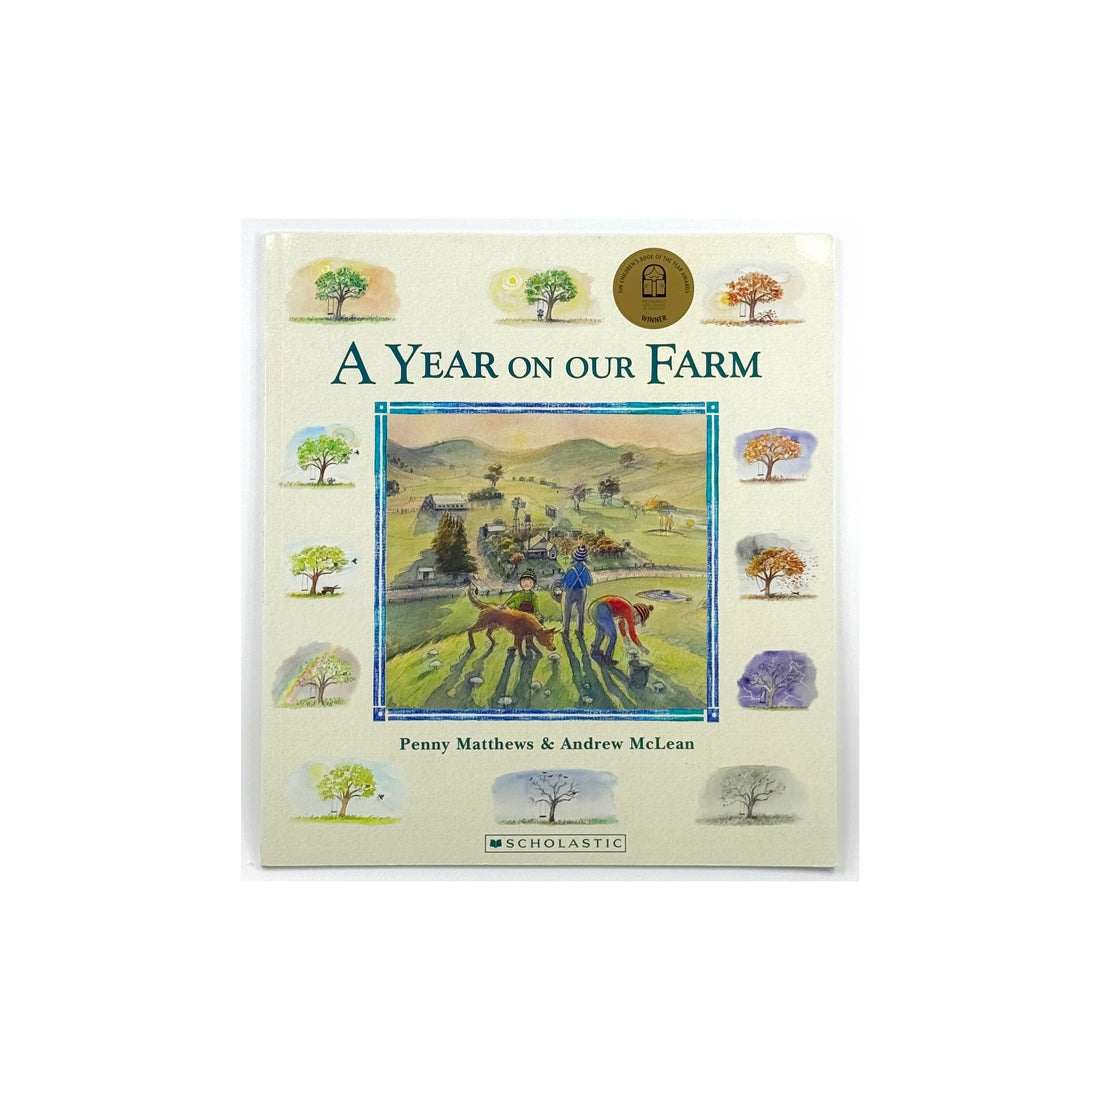 A Year On Our Farm [Paperback] by Penny Matthews